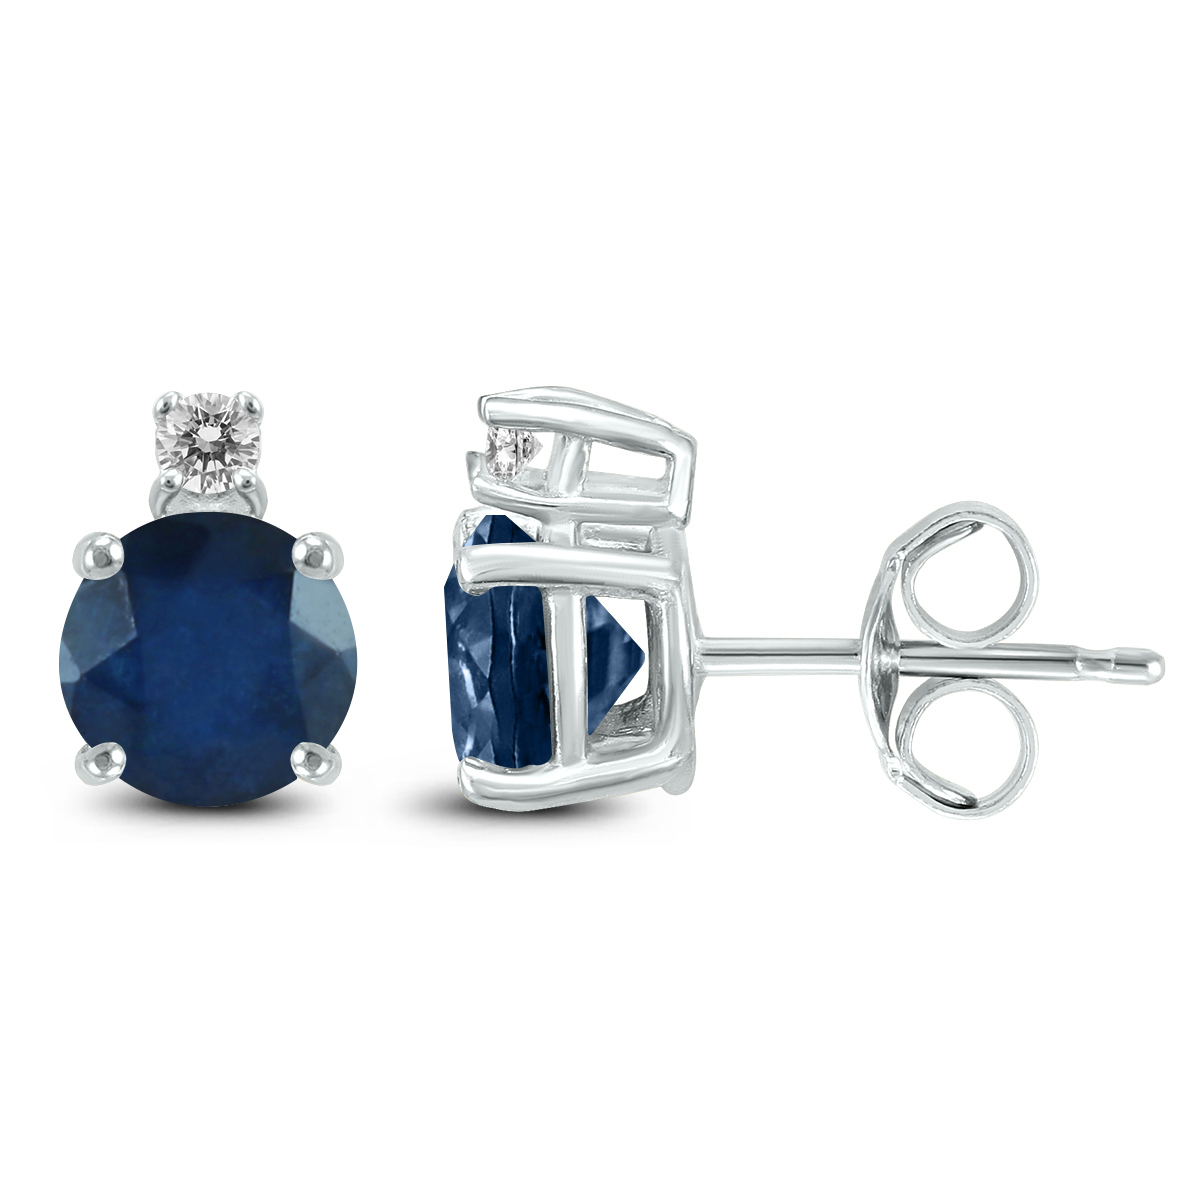 14K White Gold 4MM Round Sapphire and Diamond Earrings